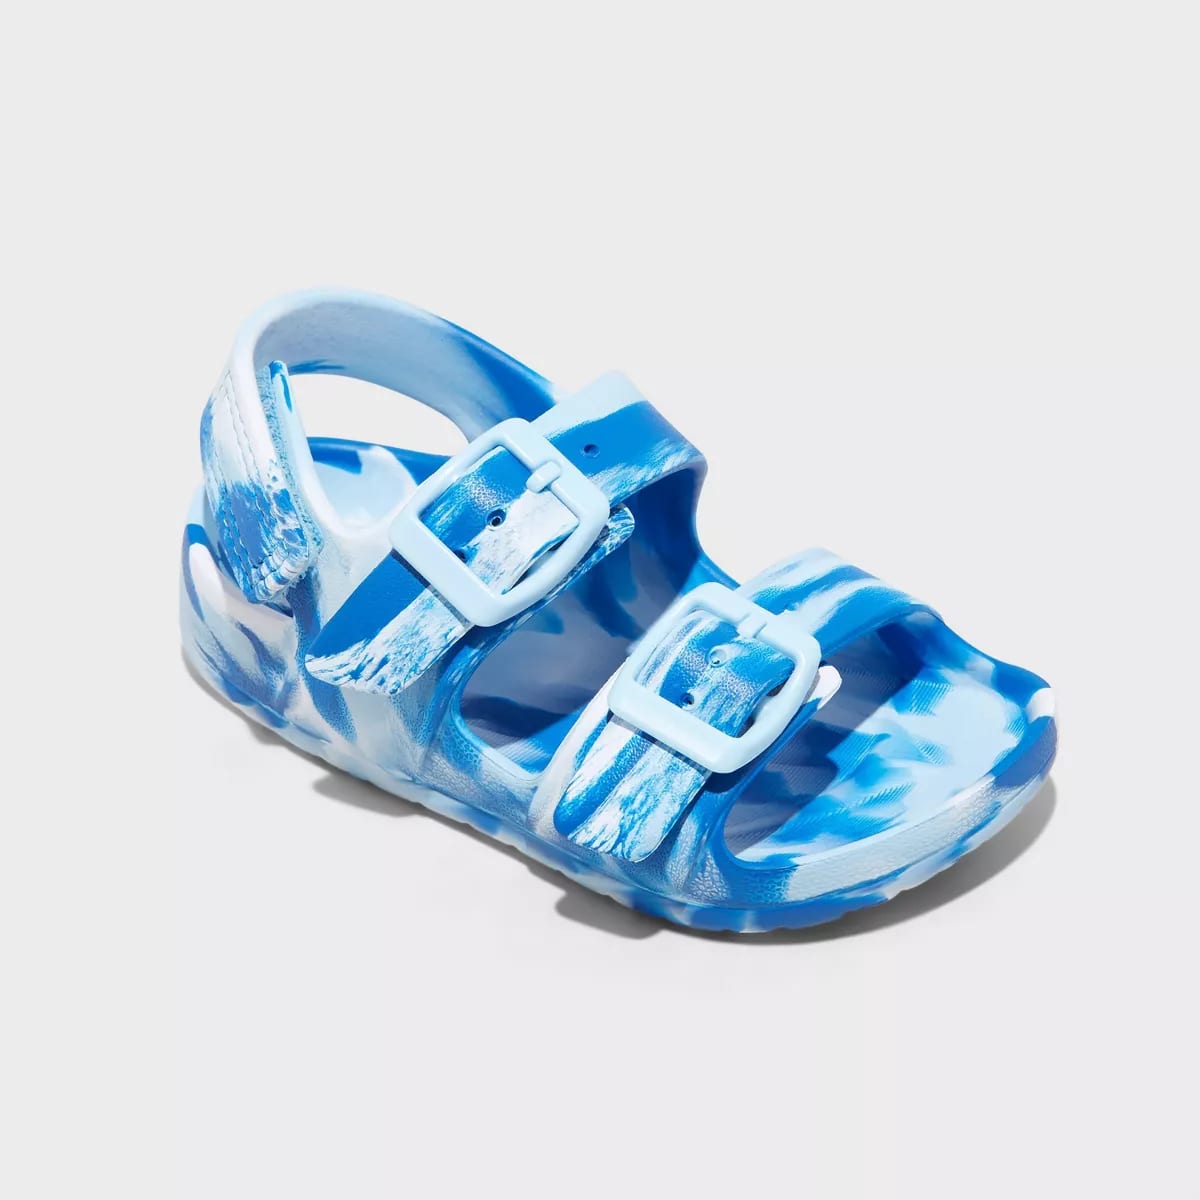 A pair of blue sandals for a toddler.